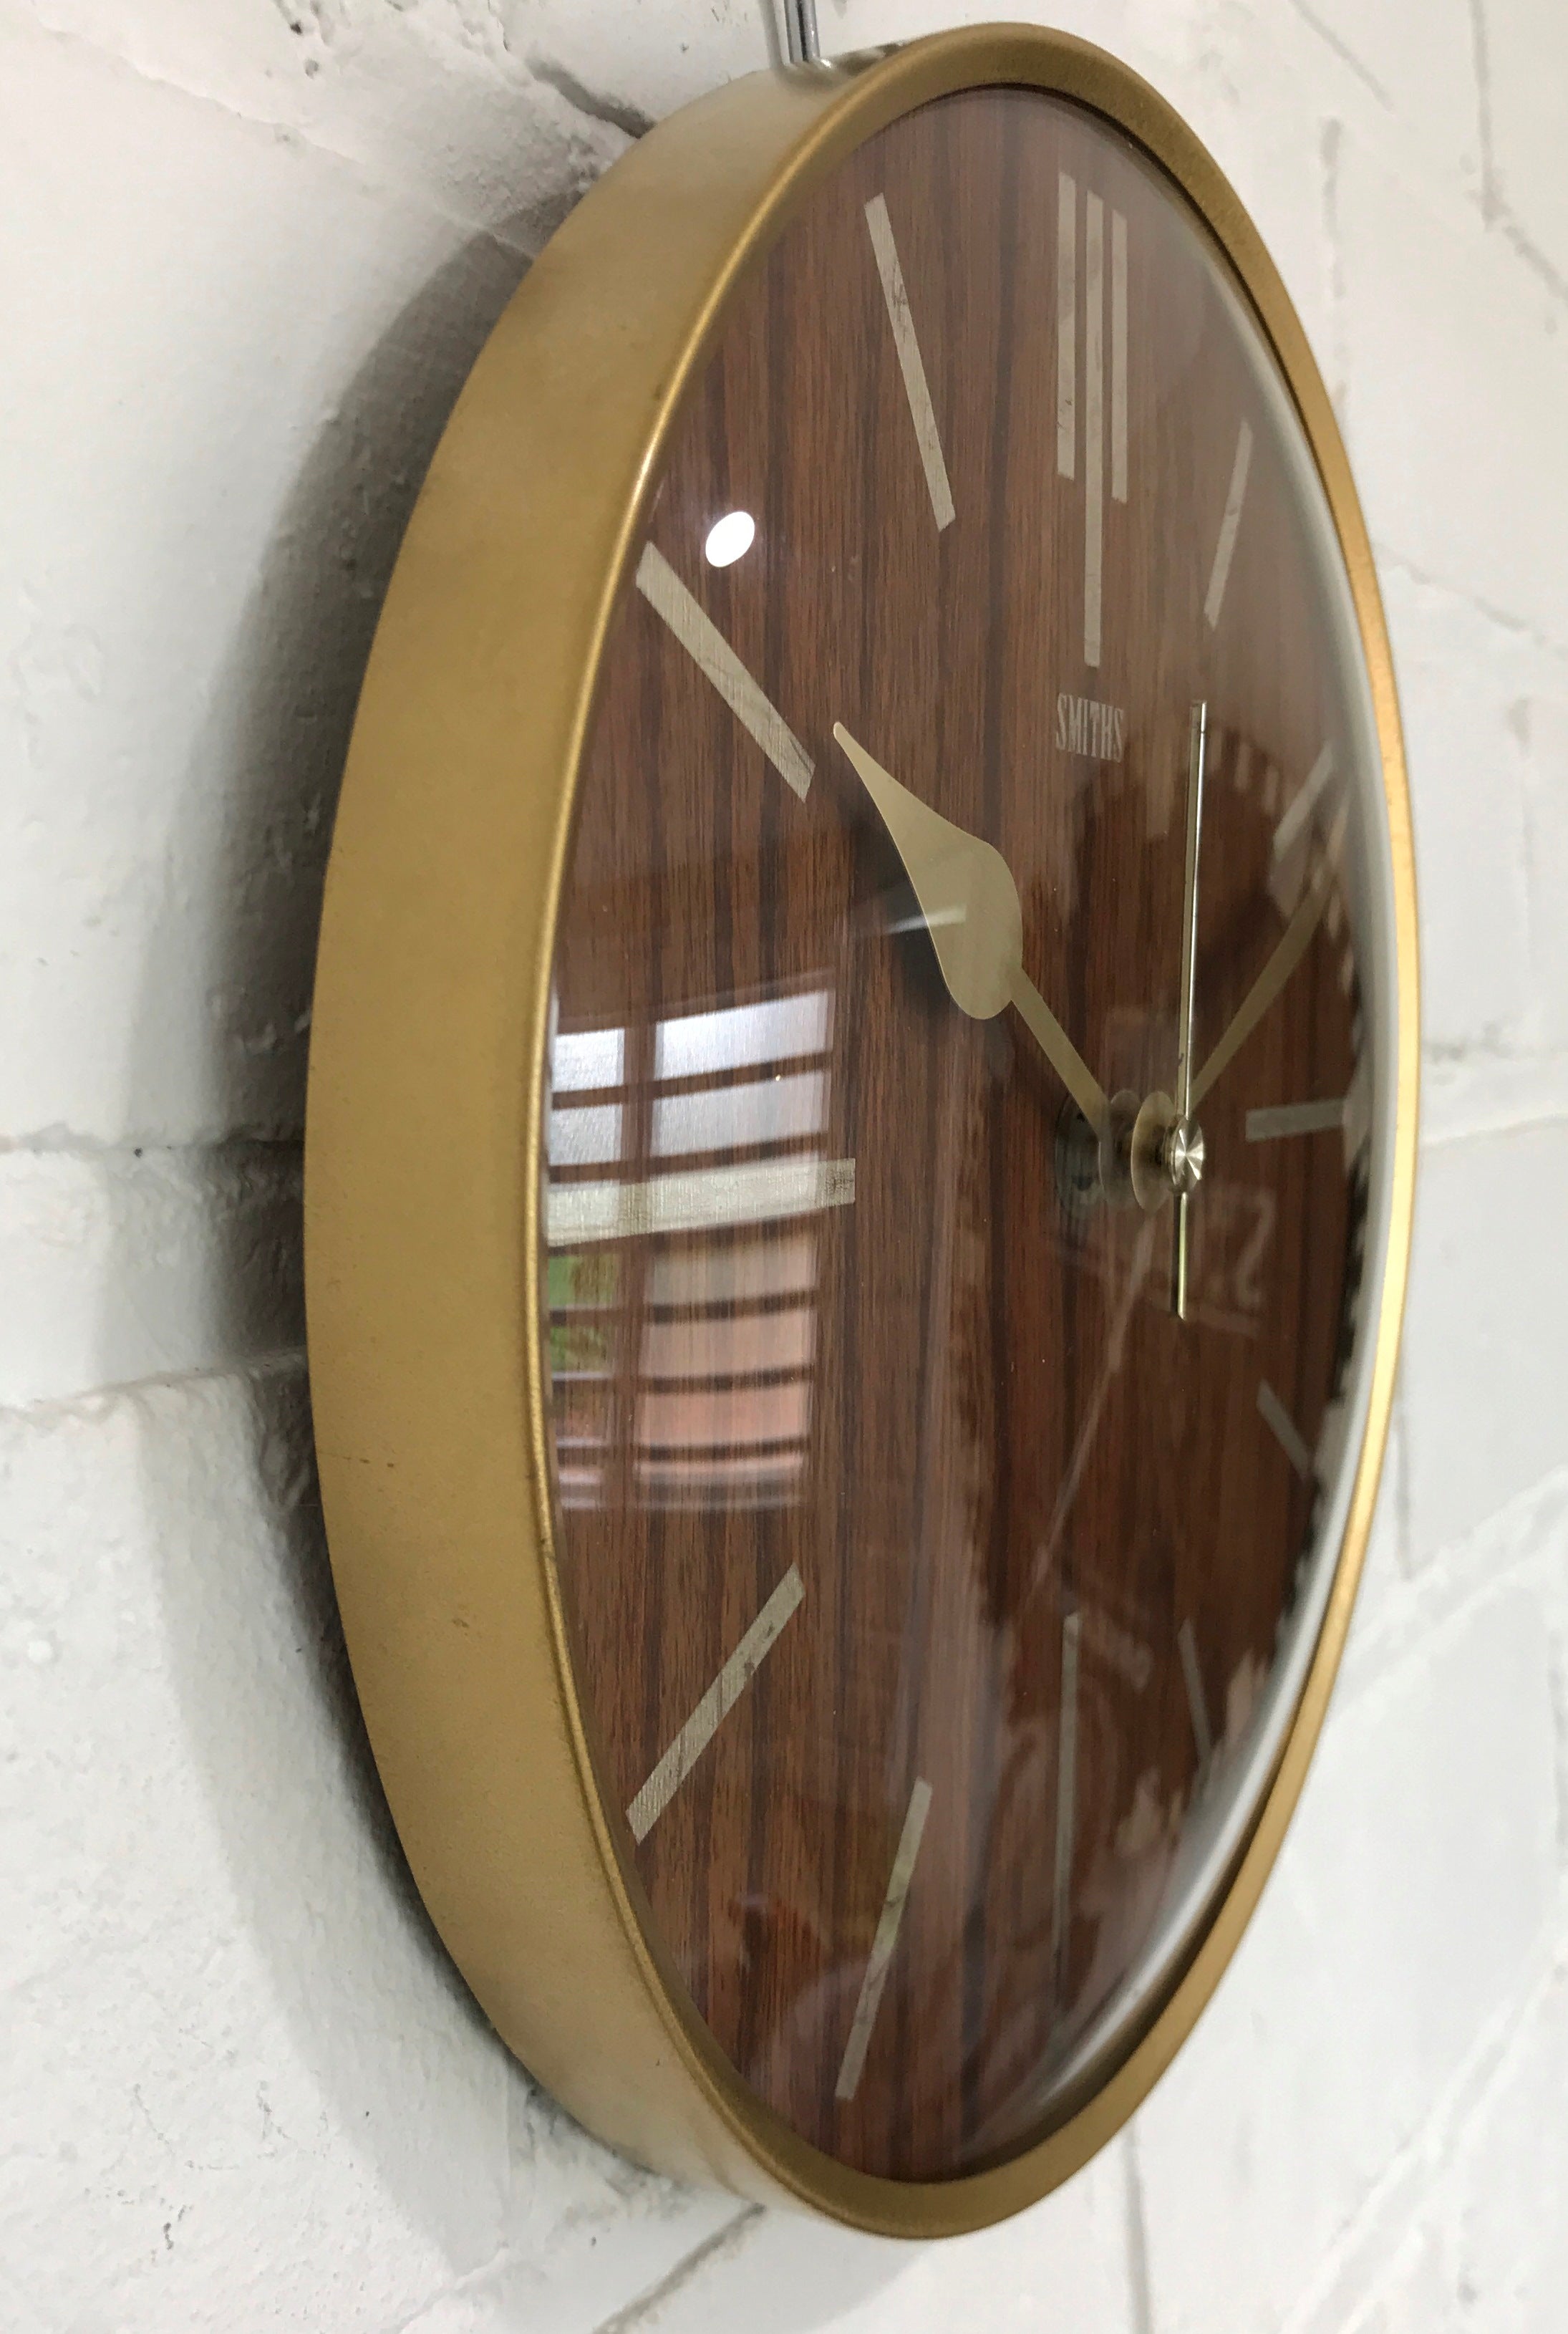 Vintage Smiths Wall Clock | eXibit collection